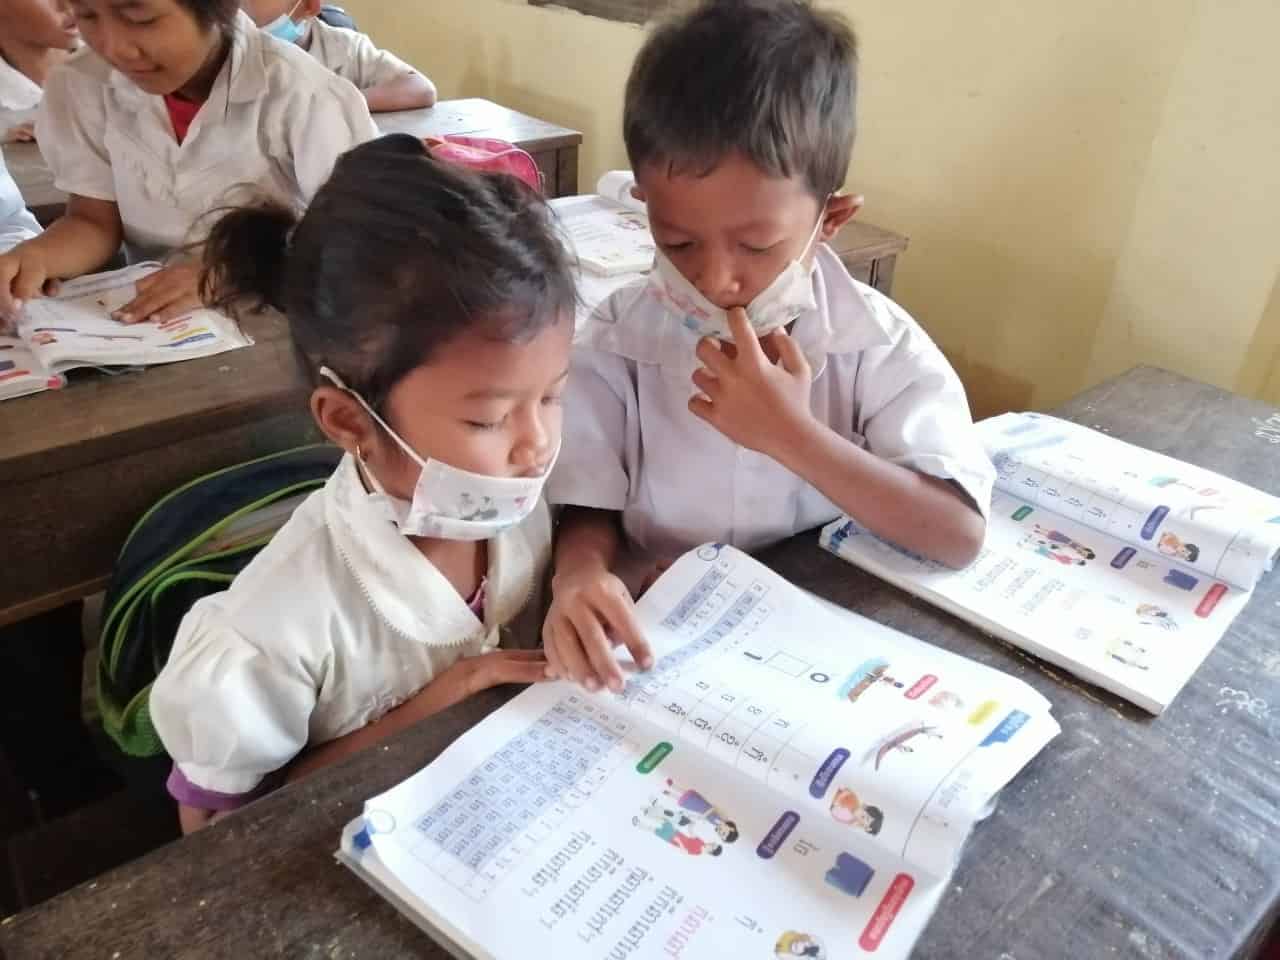 Food for Education Project Adapts amidst COVID-19 School Closures in Cambodia